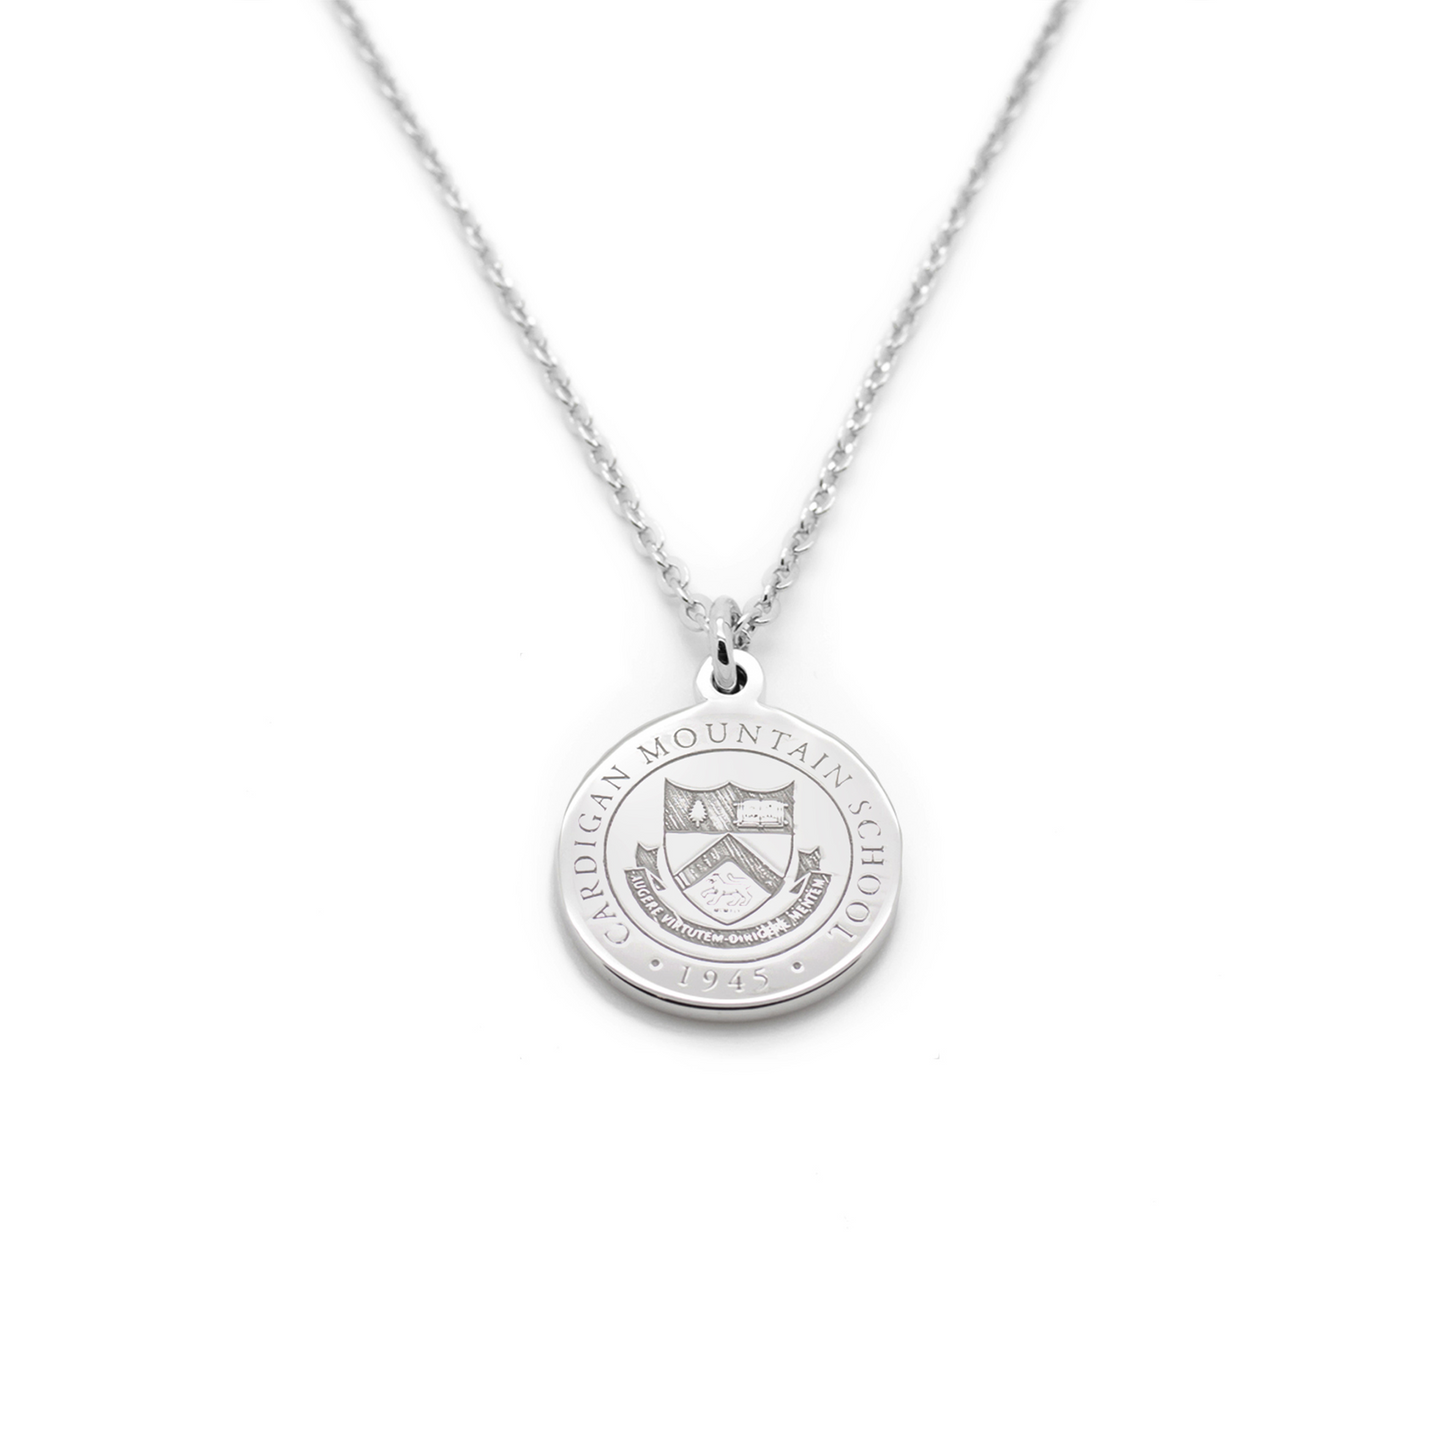 STERLING PENDANT NECKLACE